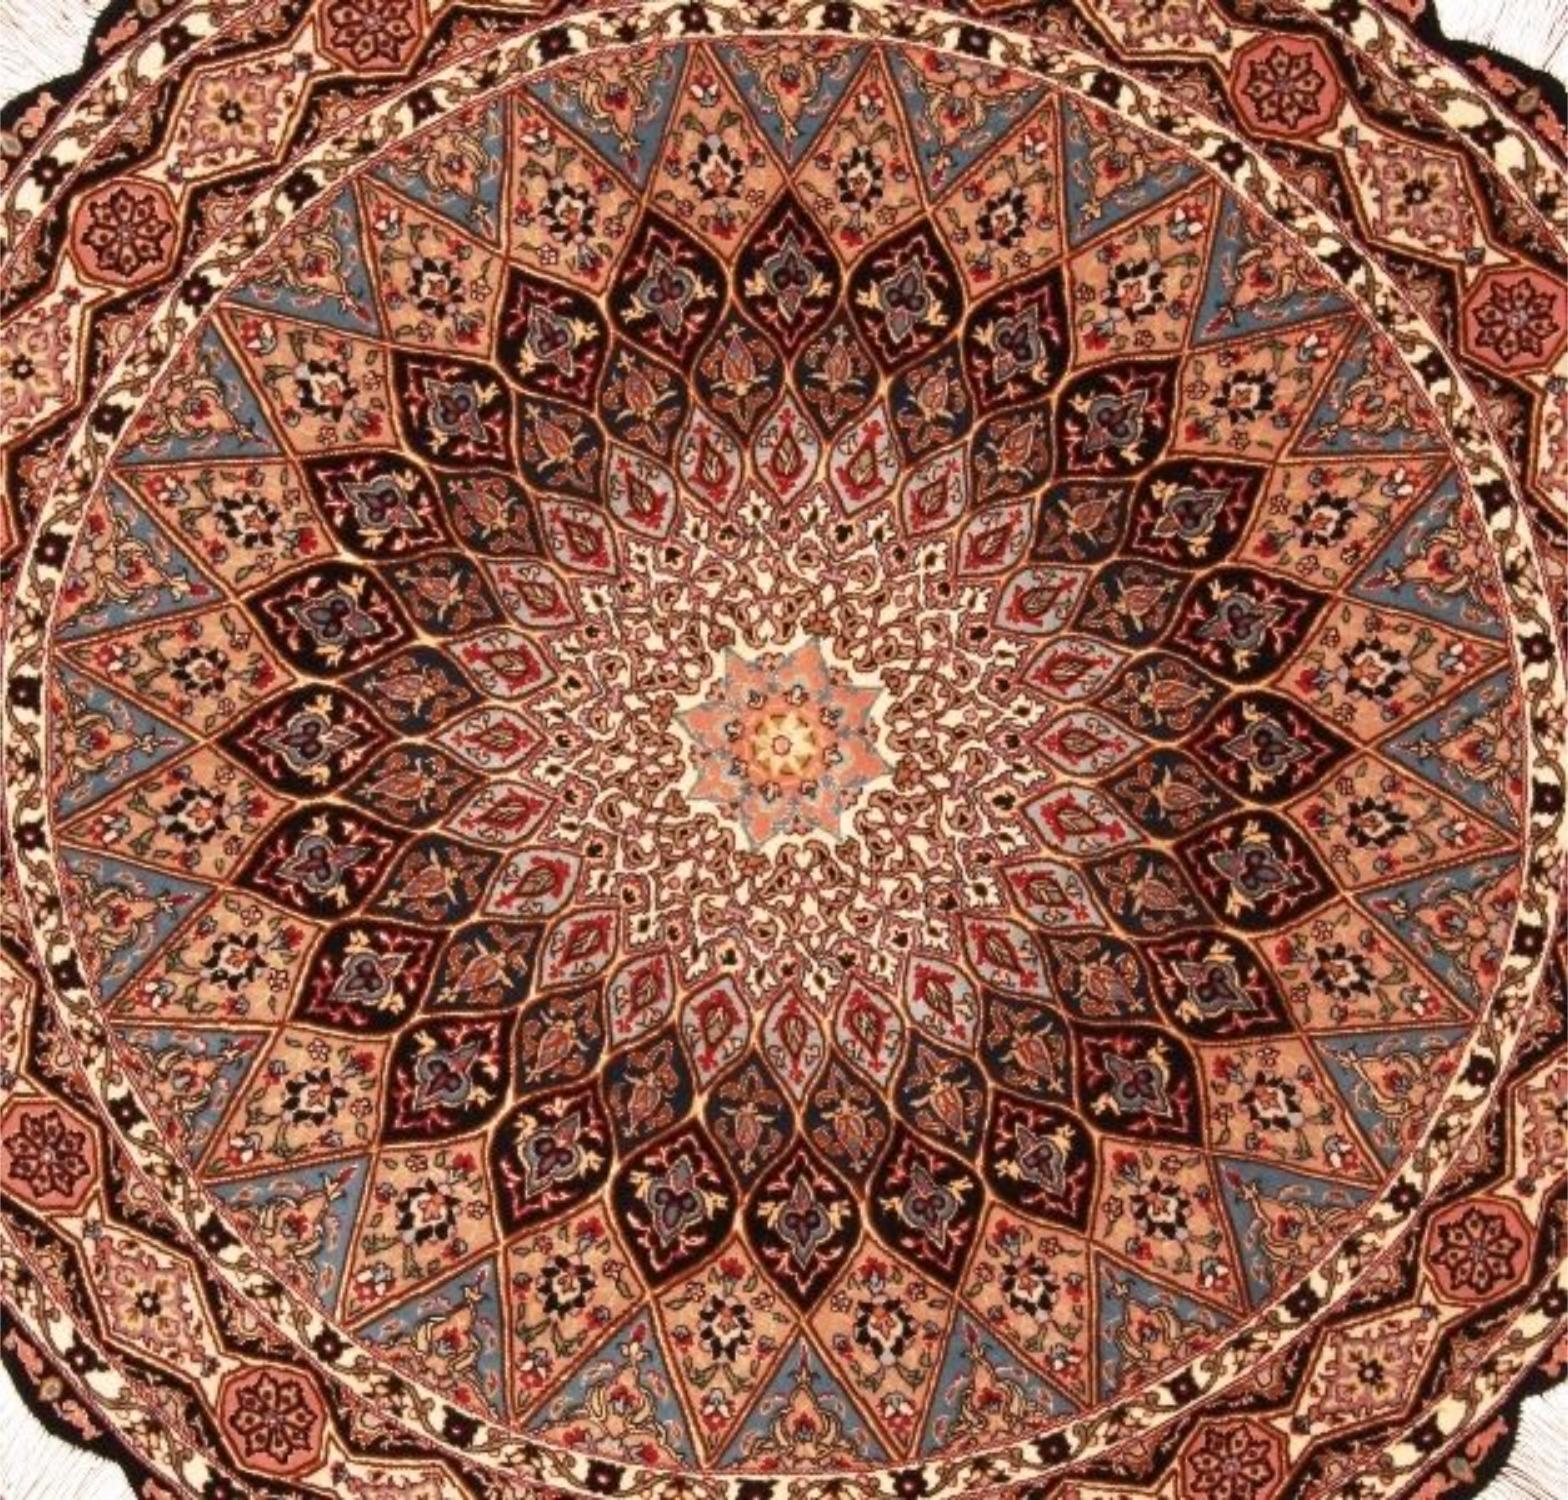 Handmade Vintage Persian Style Tabriz 50 Raj Rug

Dimensions: 4.9’ diameter (approximately 150 cm diameter)
Material: Wool with Silk Highlights
Era: 1970s
Condition: Good

Behold the splendor of this round Tabriz 50 Raj rug, a handcrafted